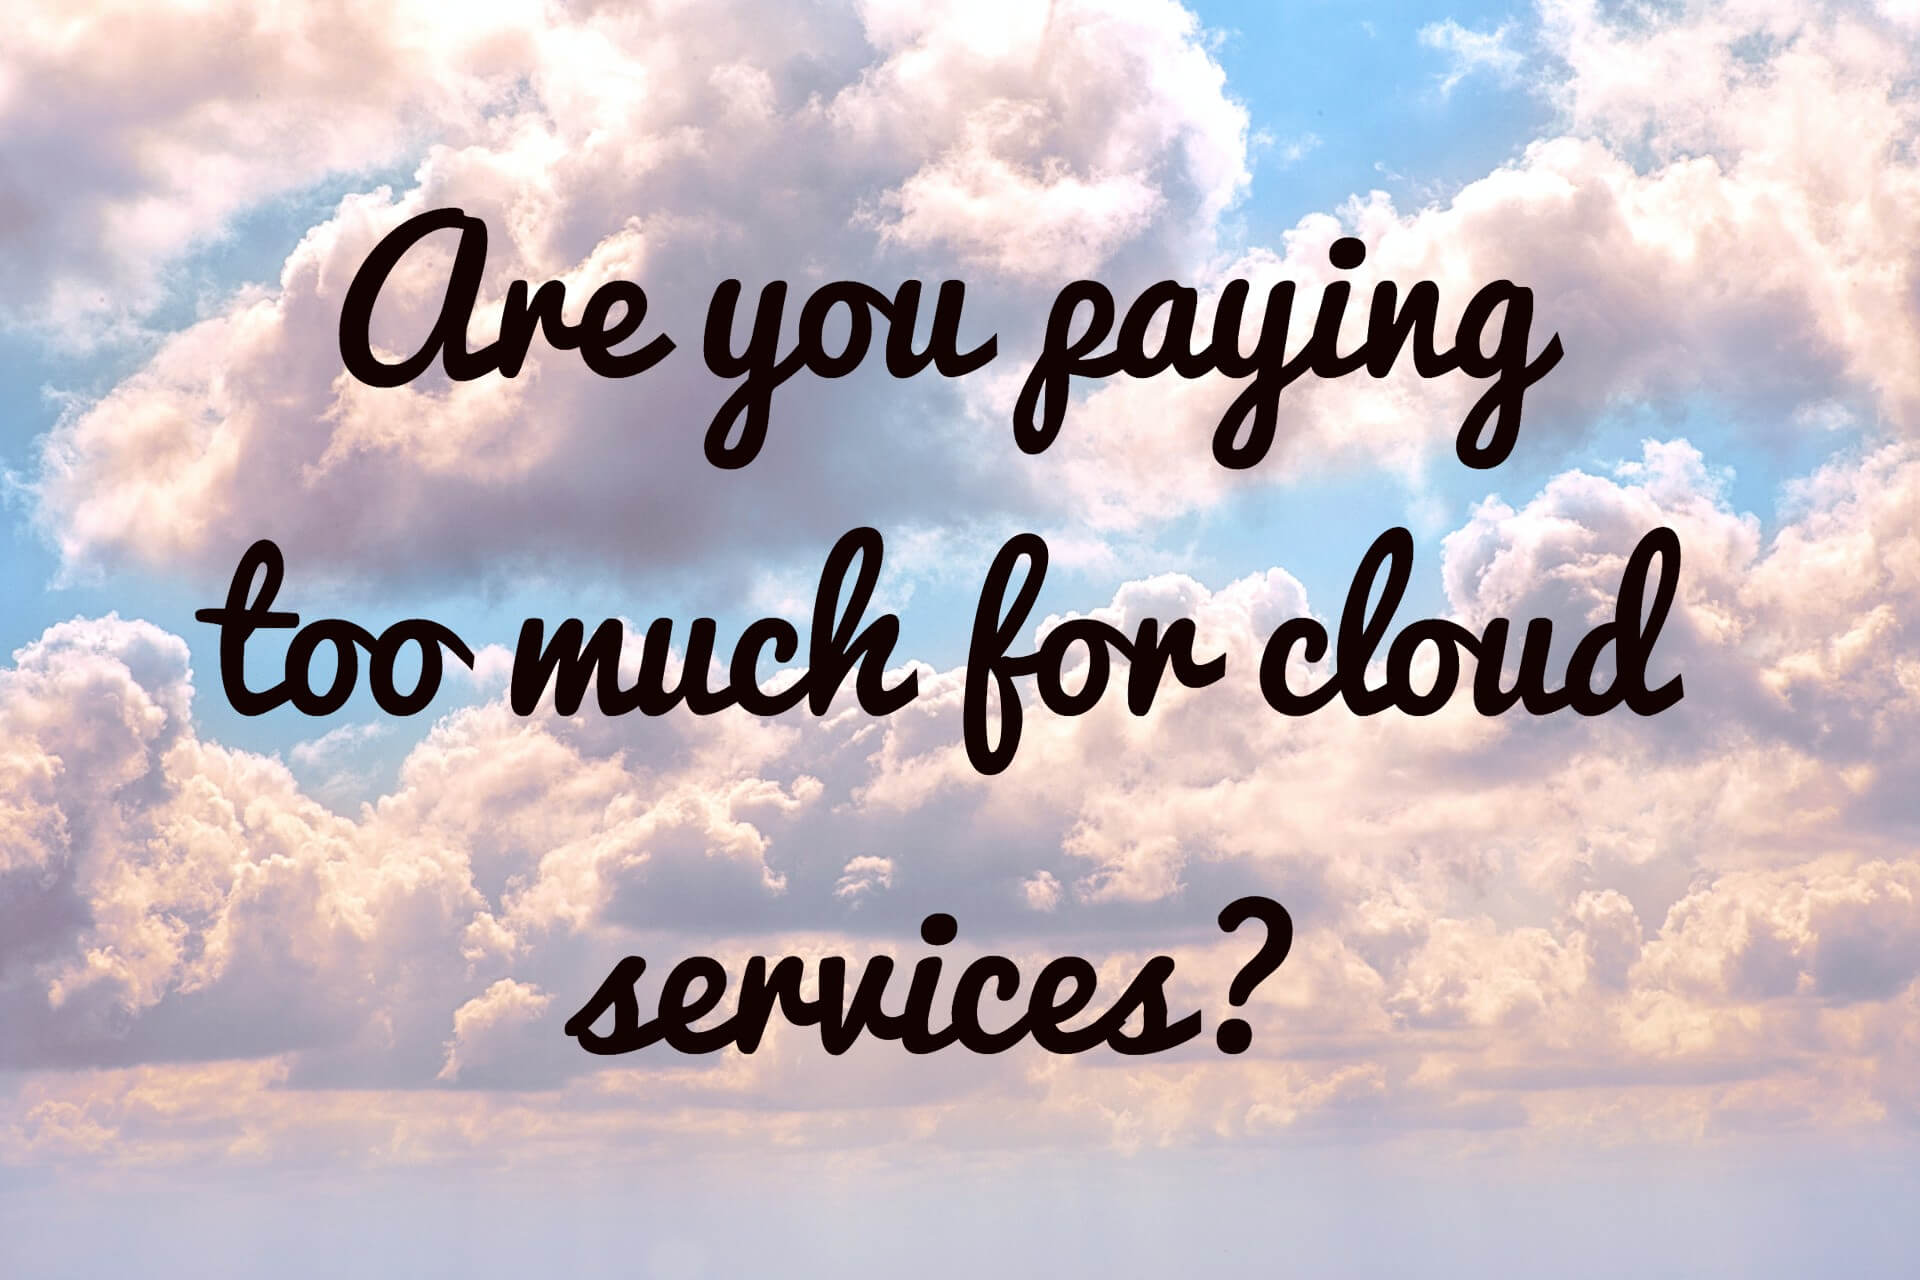 Cloud Services For Business: Are You Paying Too Much?